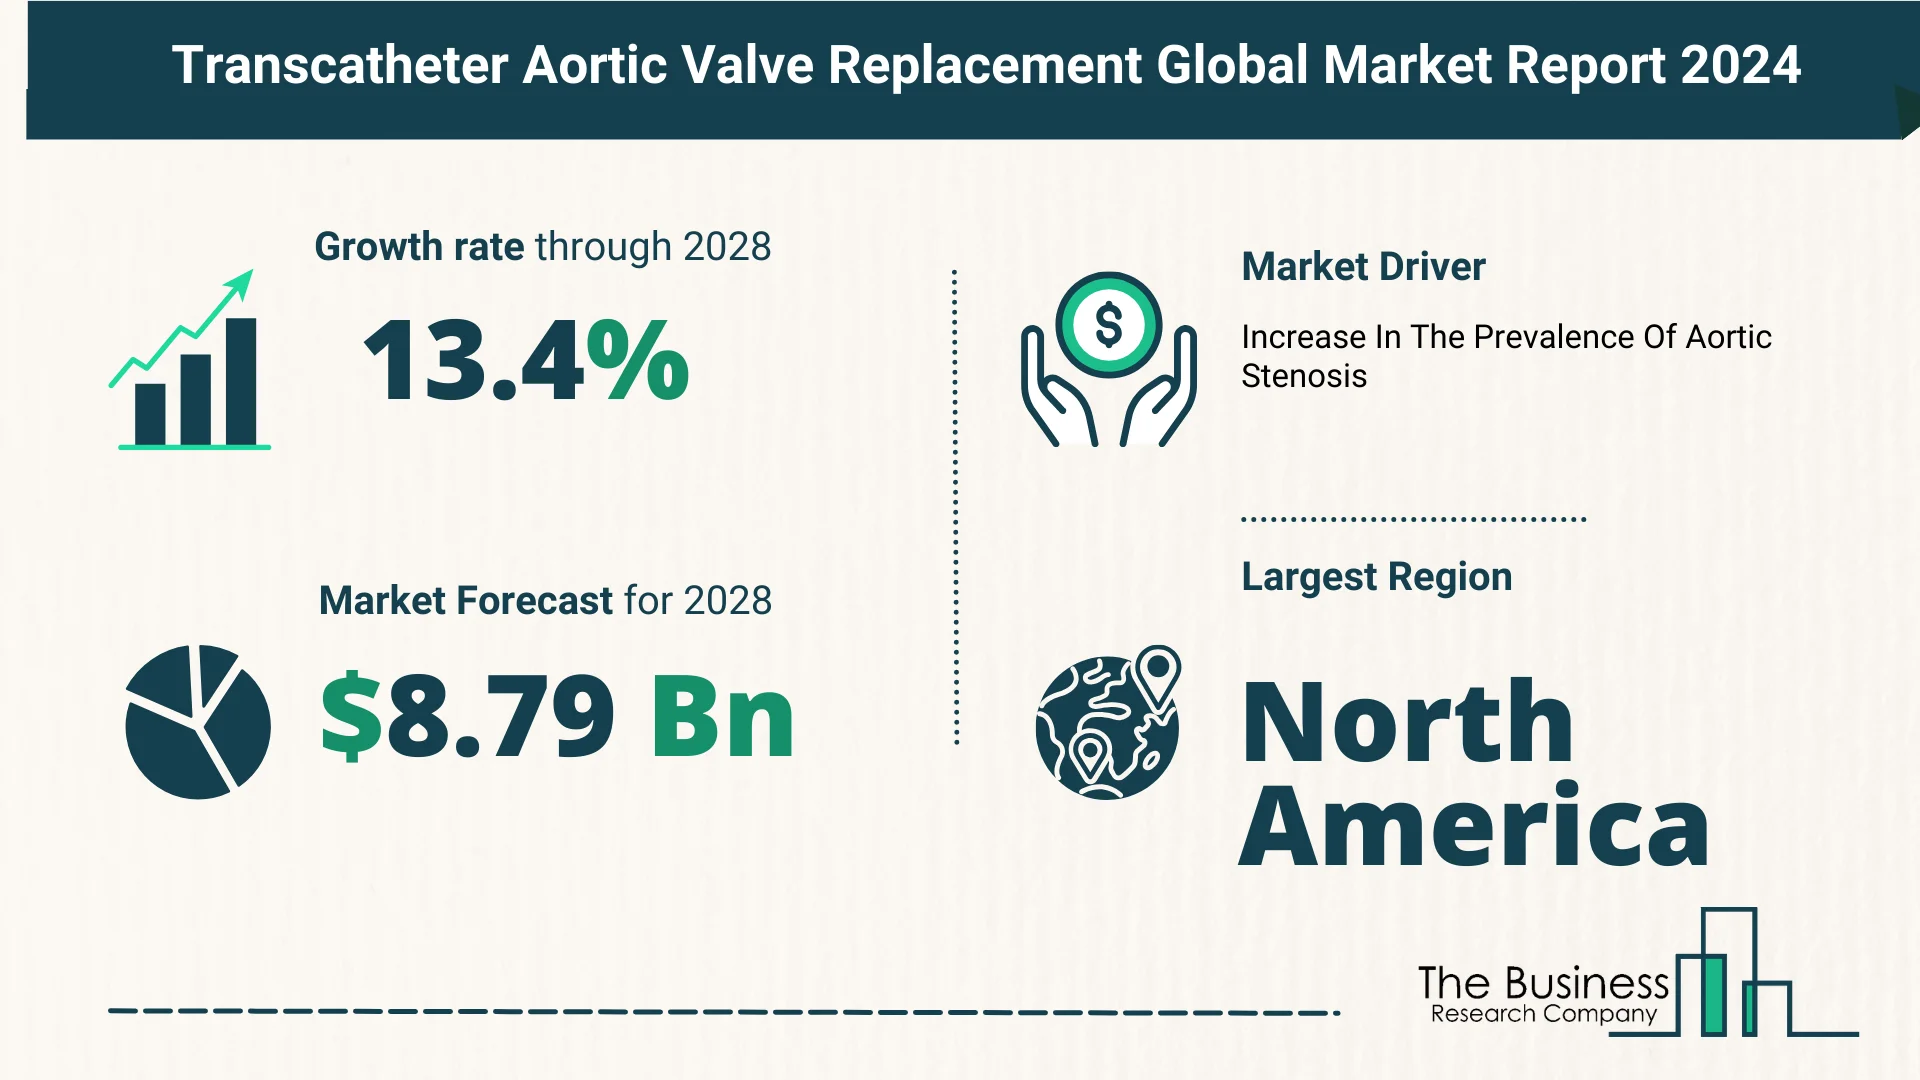 Global Transcatheter Aortic Valve Replacement Market Size